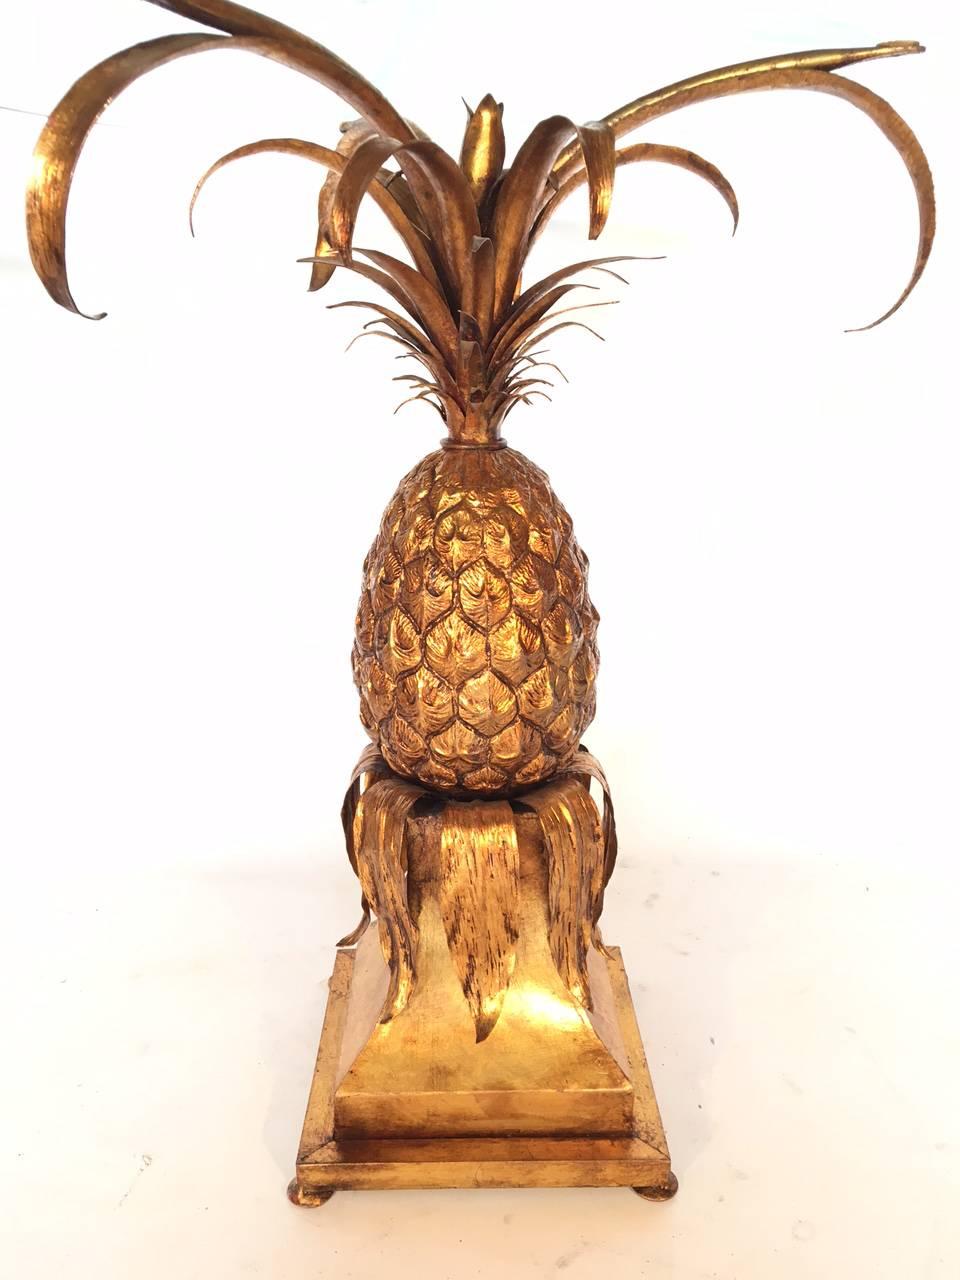 Fabulous pair of sculptural pineapple side tables perfect for your Hollywood Regency decor. Glass tops are 3/4